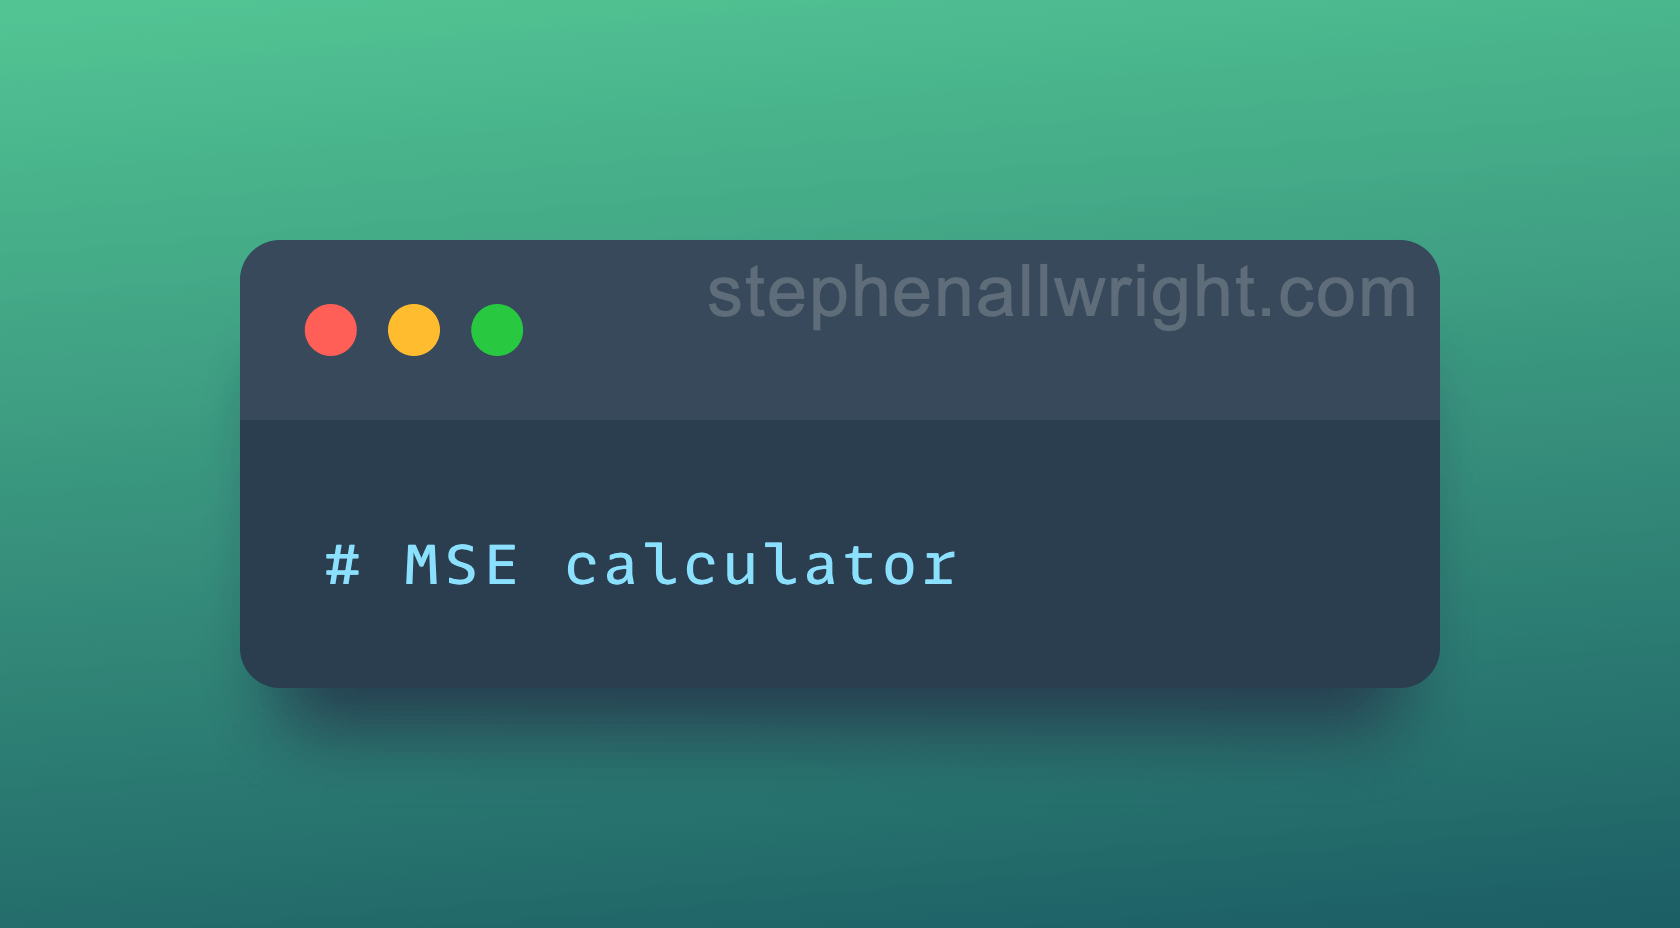 Online simple to use MSE calculator (Mean Squared Error)